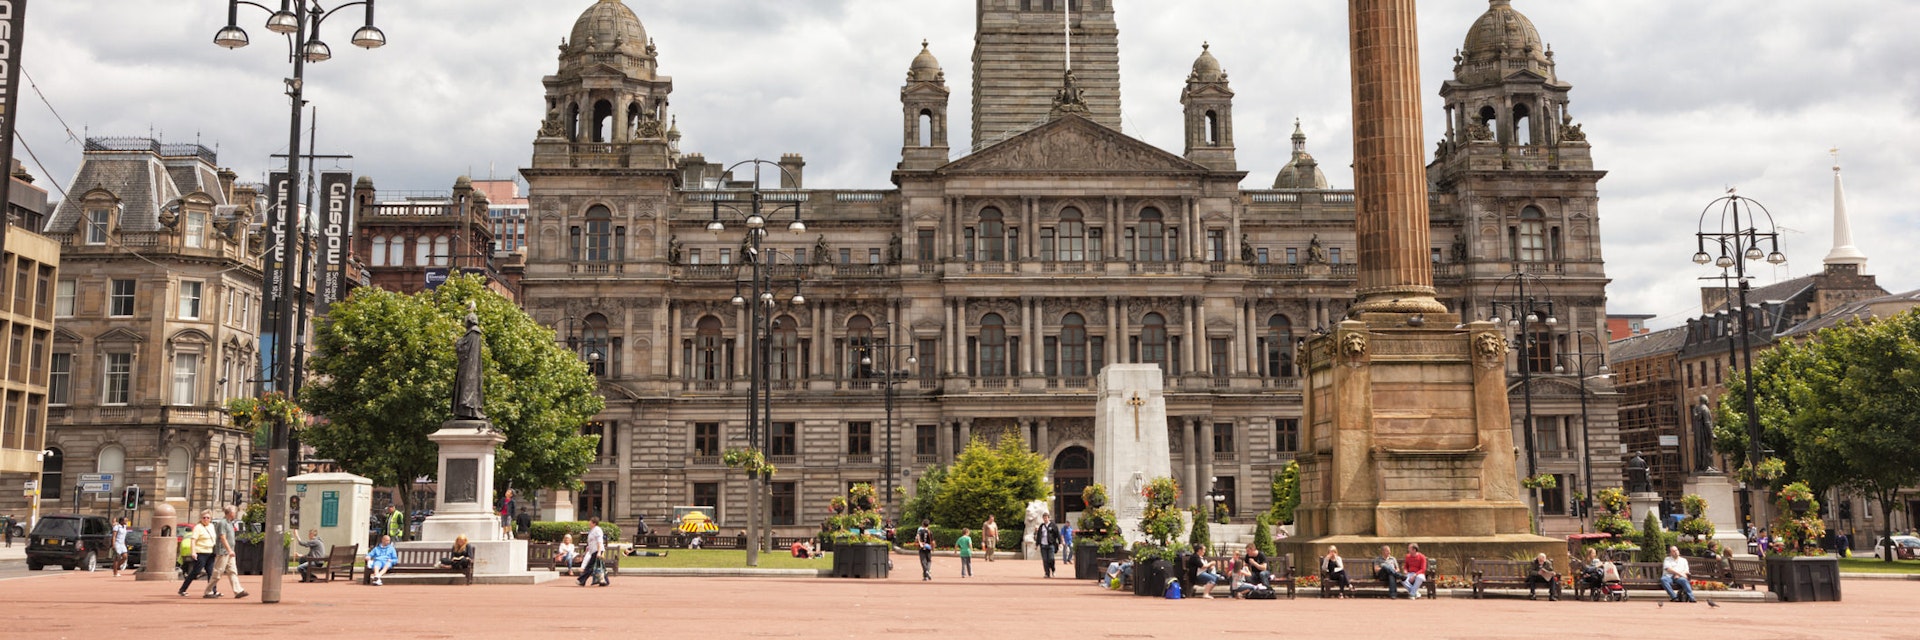 July 1, 2011: Visitors enjoy a quiet summer afternoon in George Square in Glasgow's City Centre. The Victorian City Chambers building is in the background.
458637299
Architecture, Town, George Square, Local Landmark, Photography, Scotland, Central Scotland, Glasgow, Scottish Culture, UK, Man Made Structure, Town Hall, Local Government Building, Victorian Style, Town Square, Glasgow - Scotland, City, Travel Destinations, Horizontal, Strathclyde, Government Building, City Life, City Chambers, Public Building, Editorial, Famous Place, People